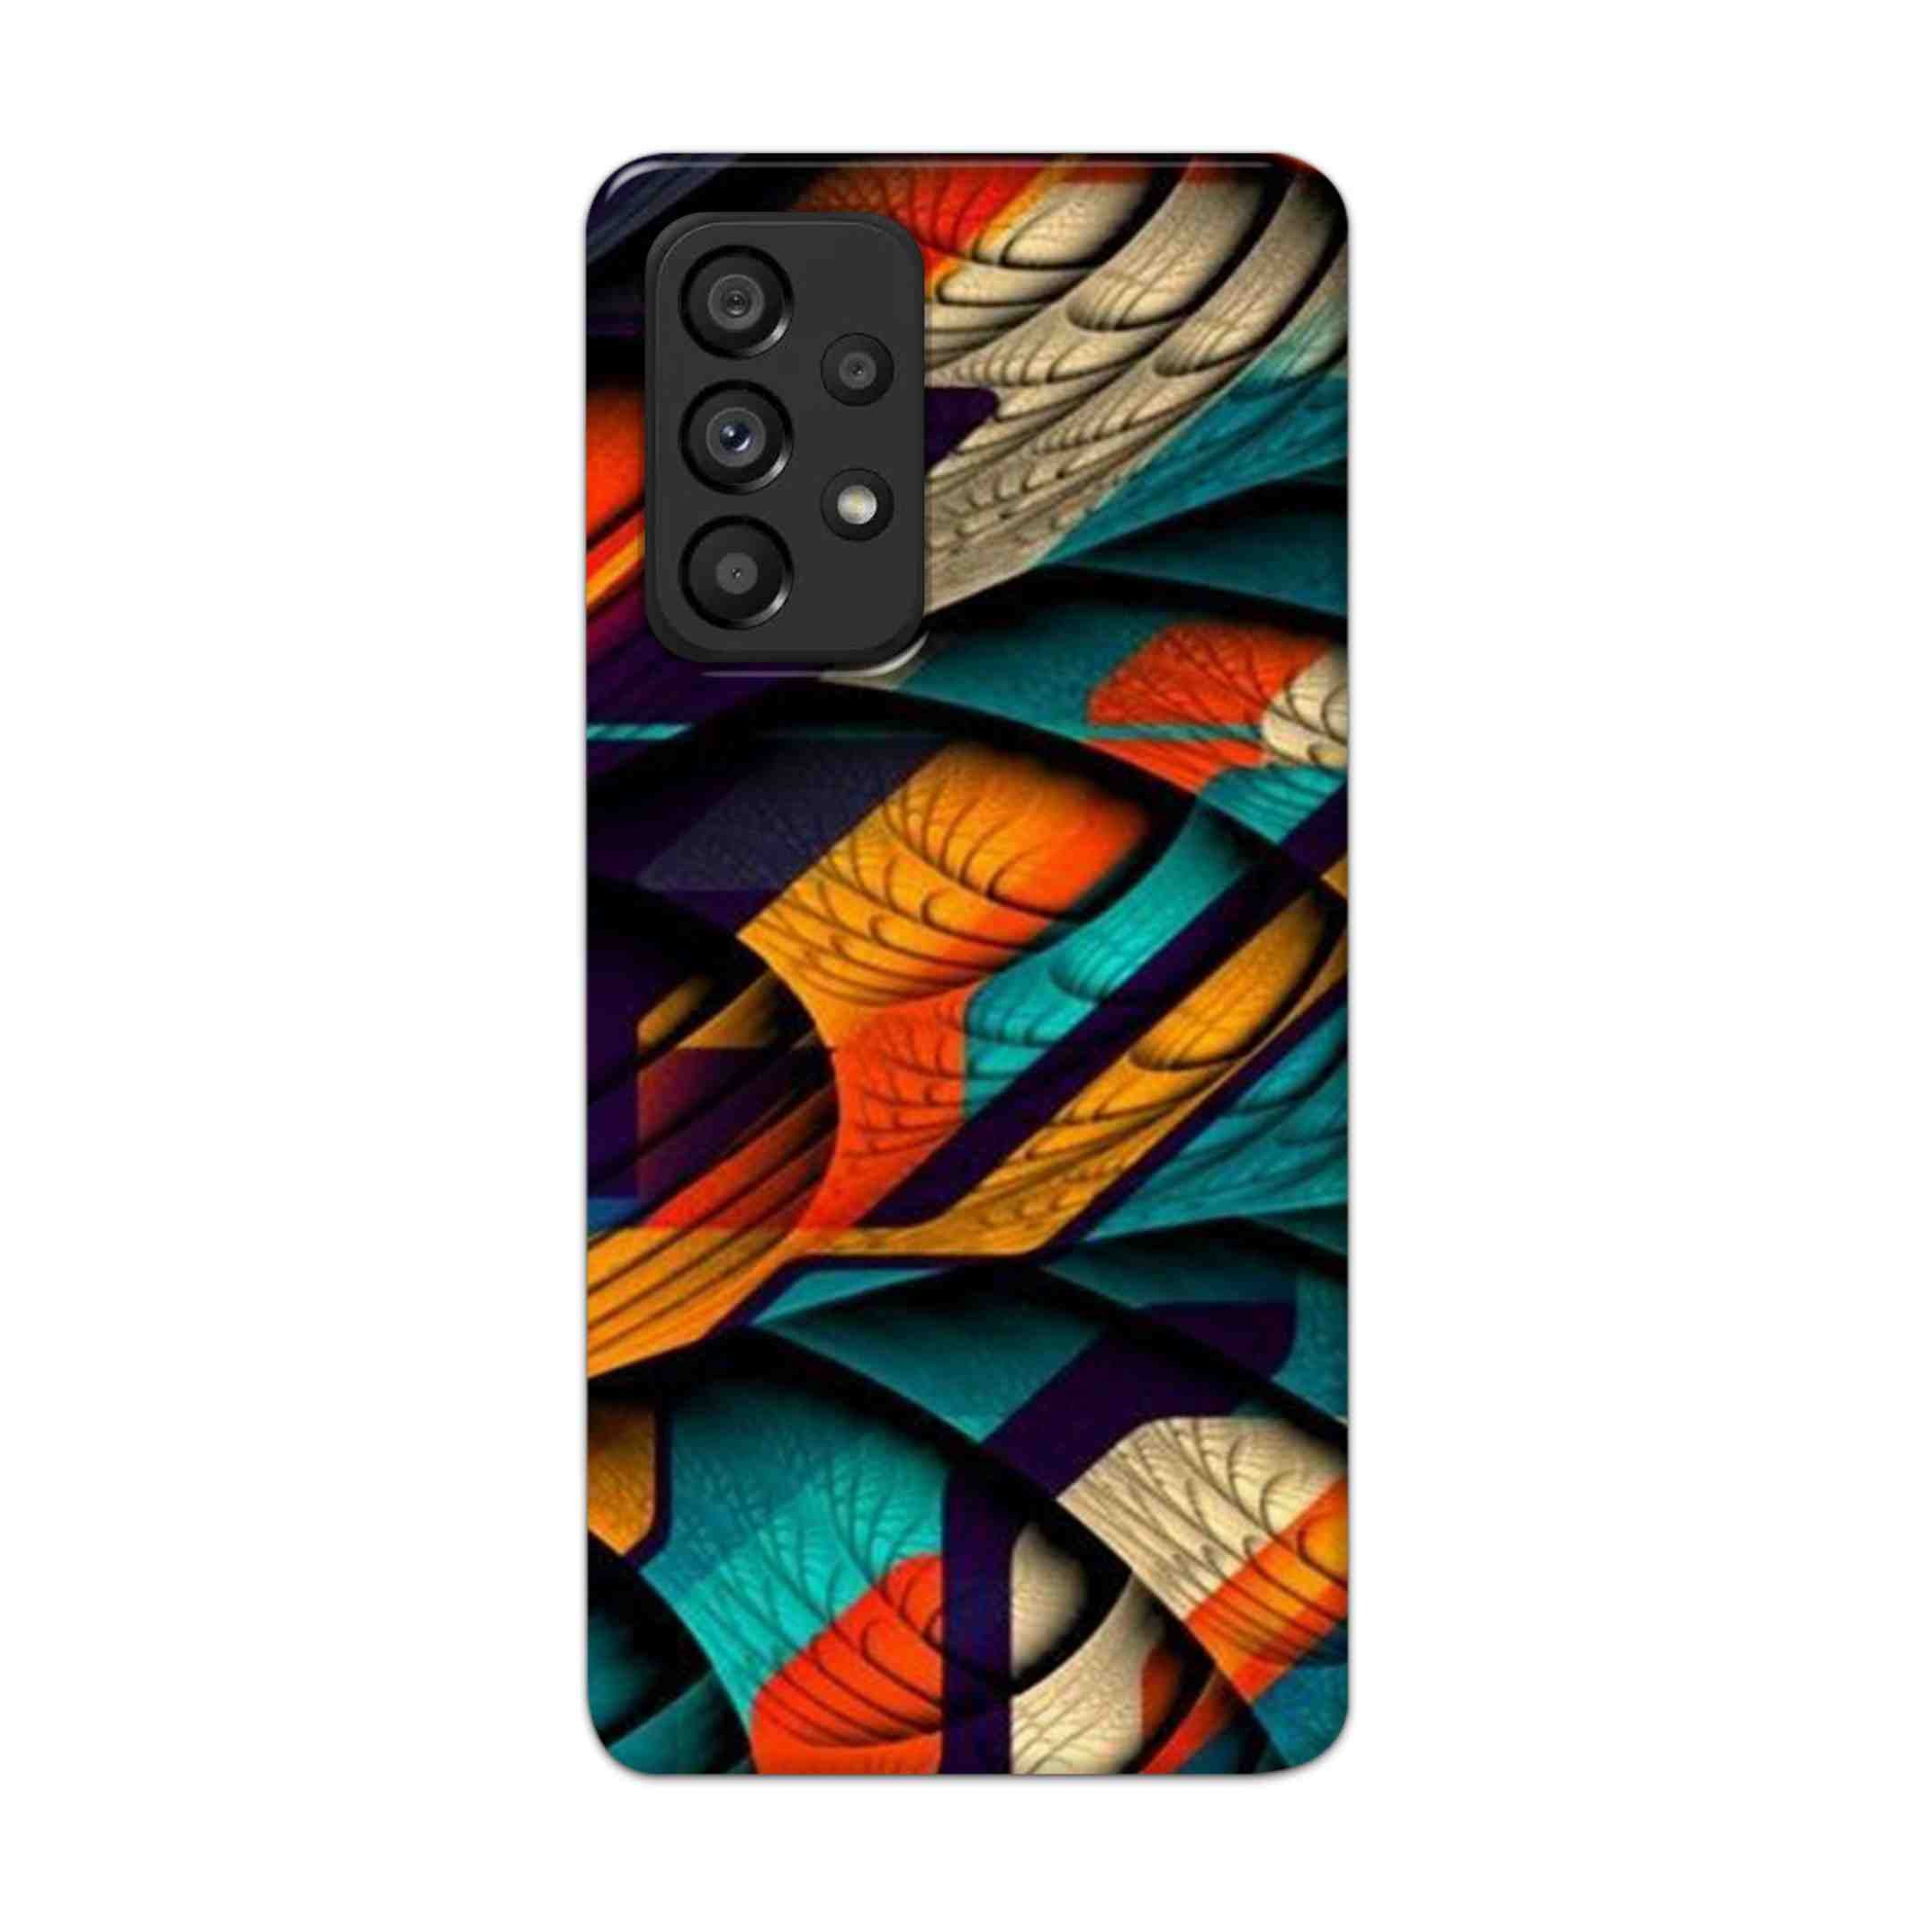 Buy Colour Abstract Hard Back Mobile Phone Case Cover For Samsung Galaxy A53 5G Online